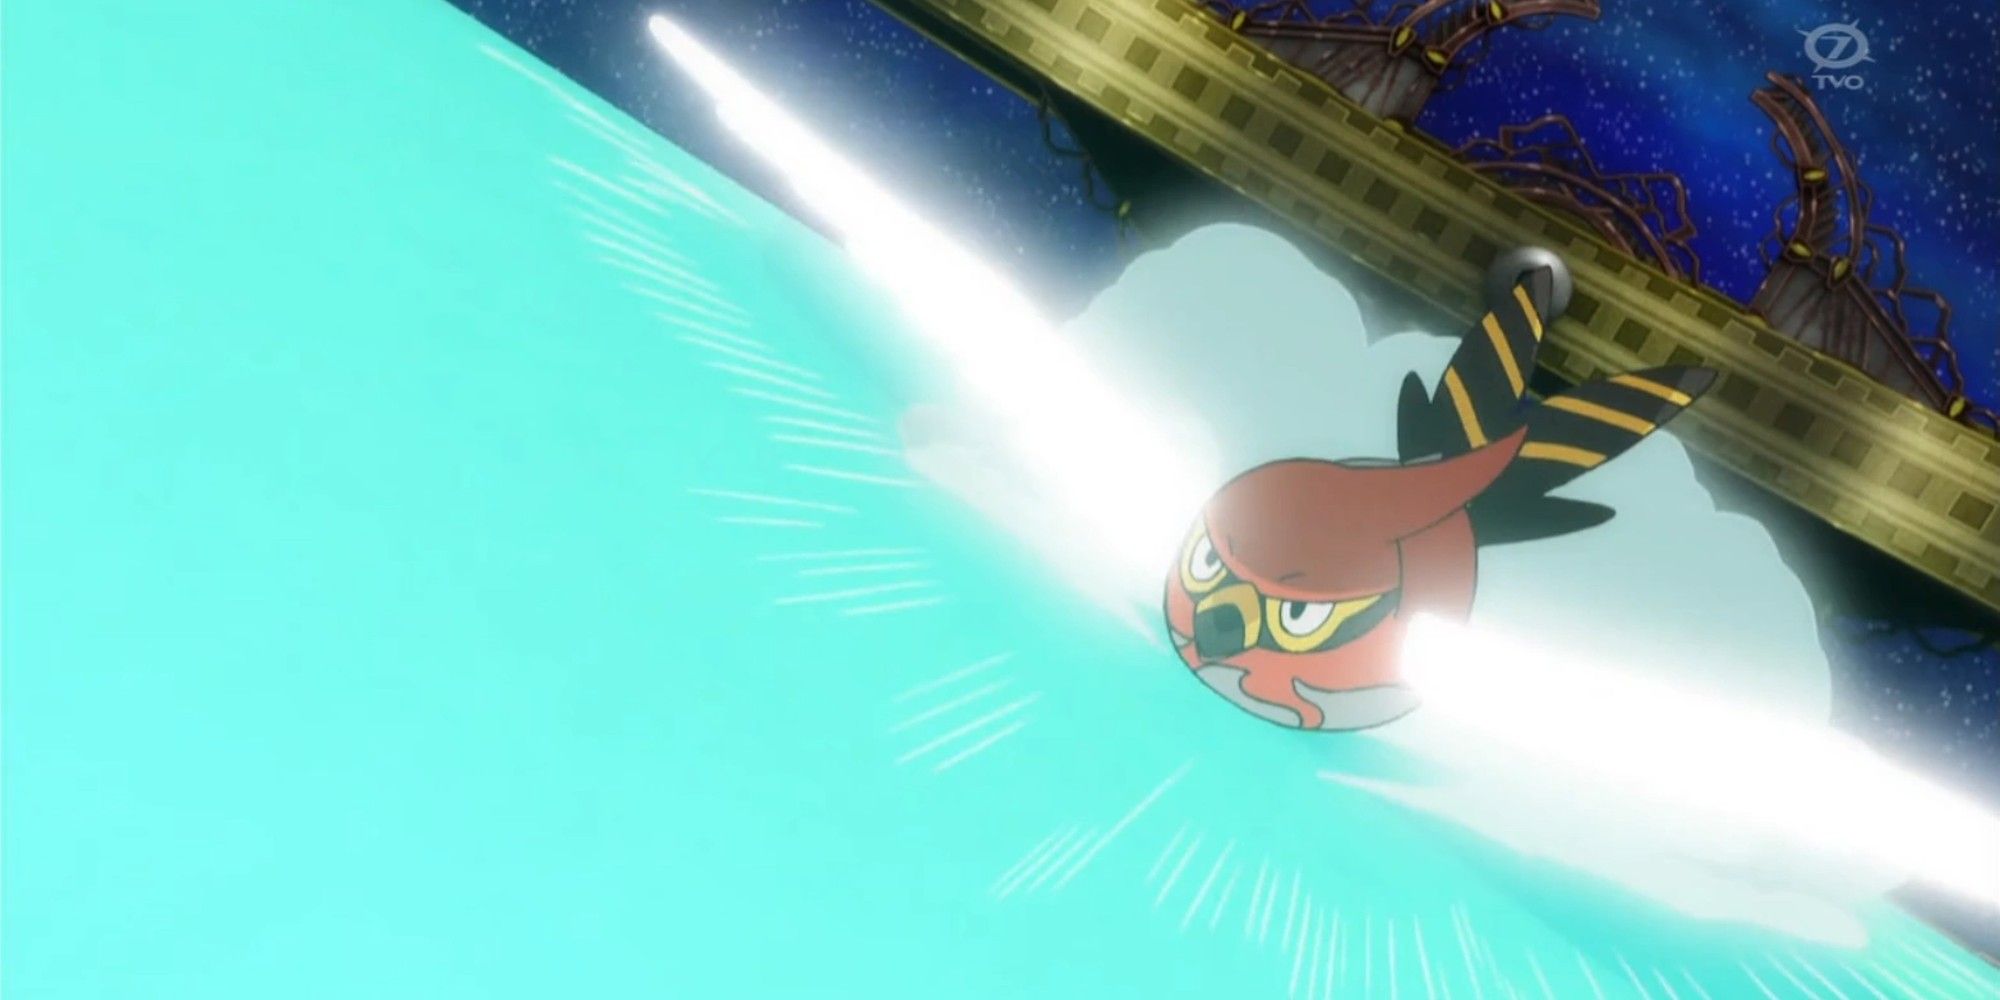 Talonflame using Steel Wing flying over water